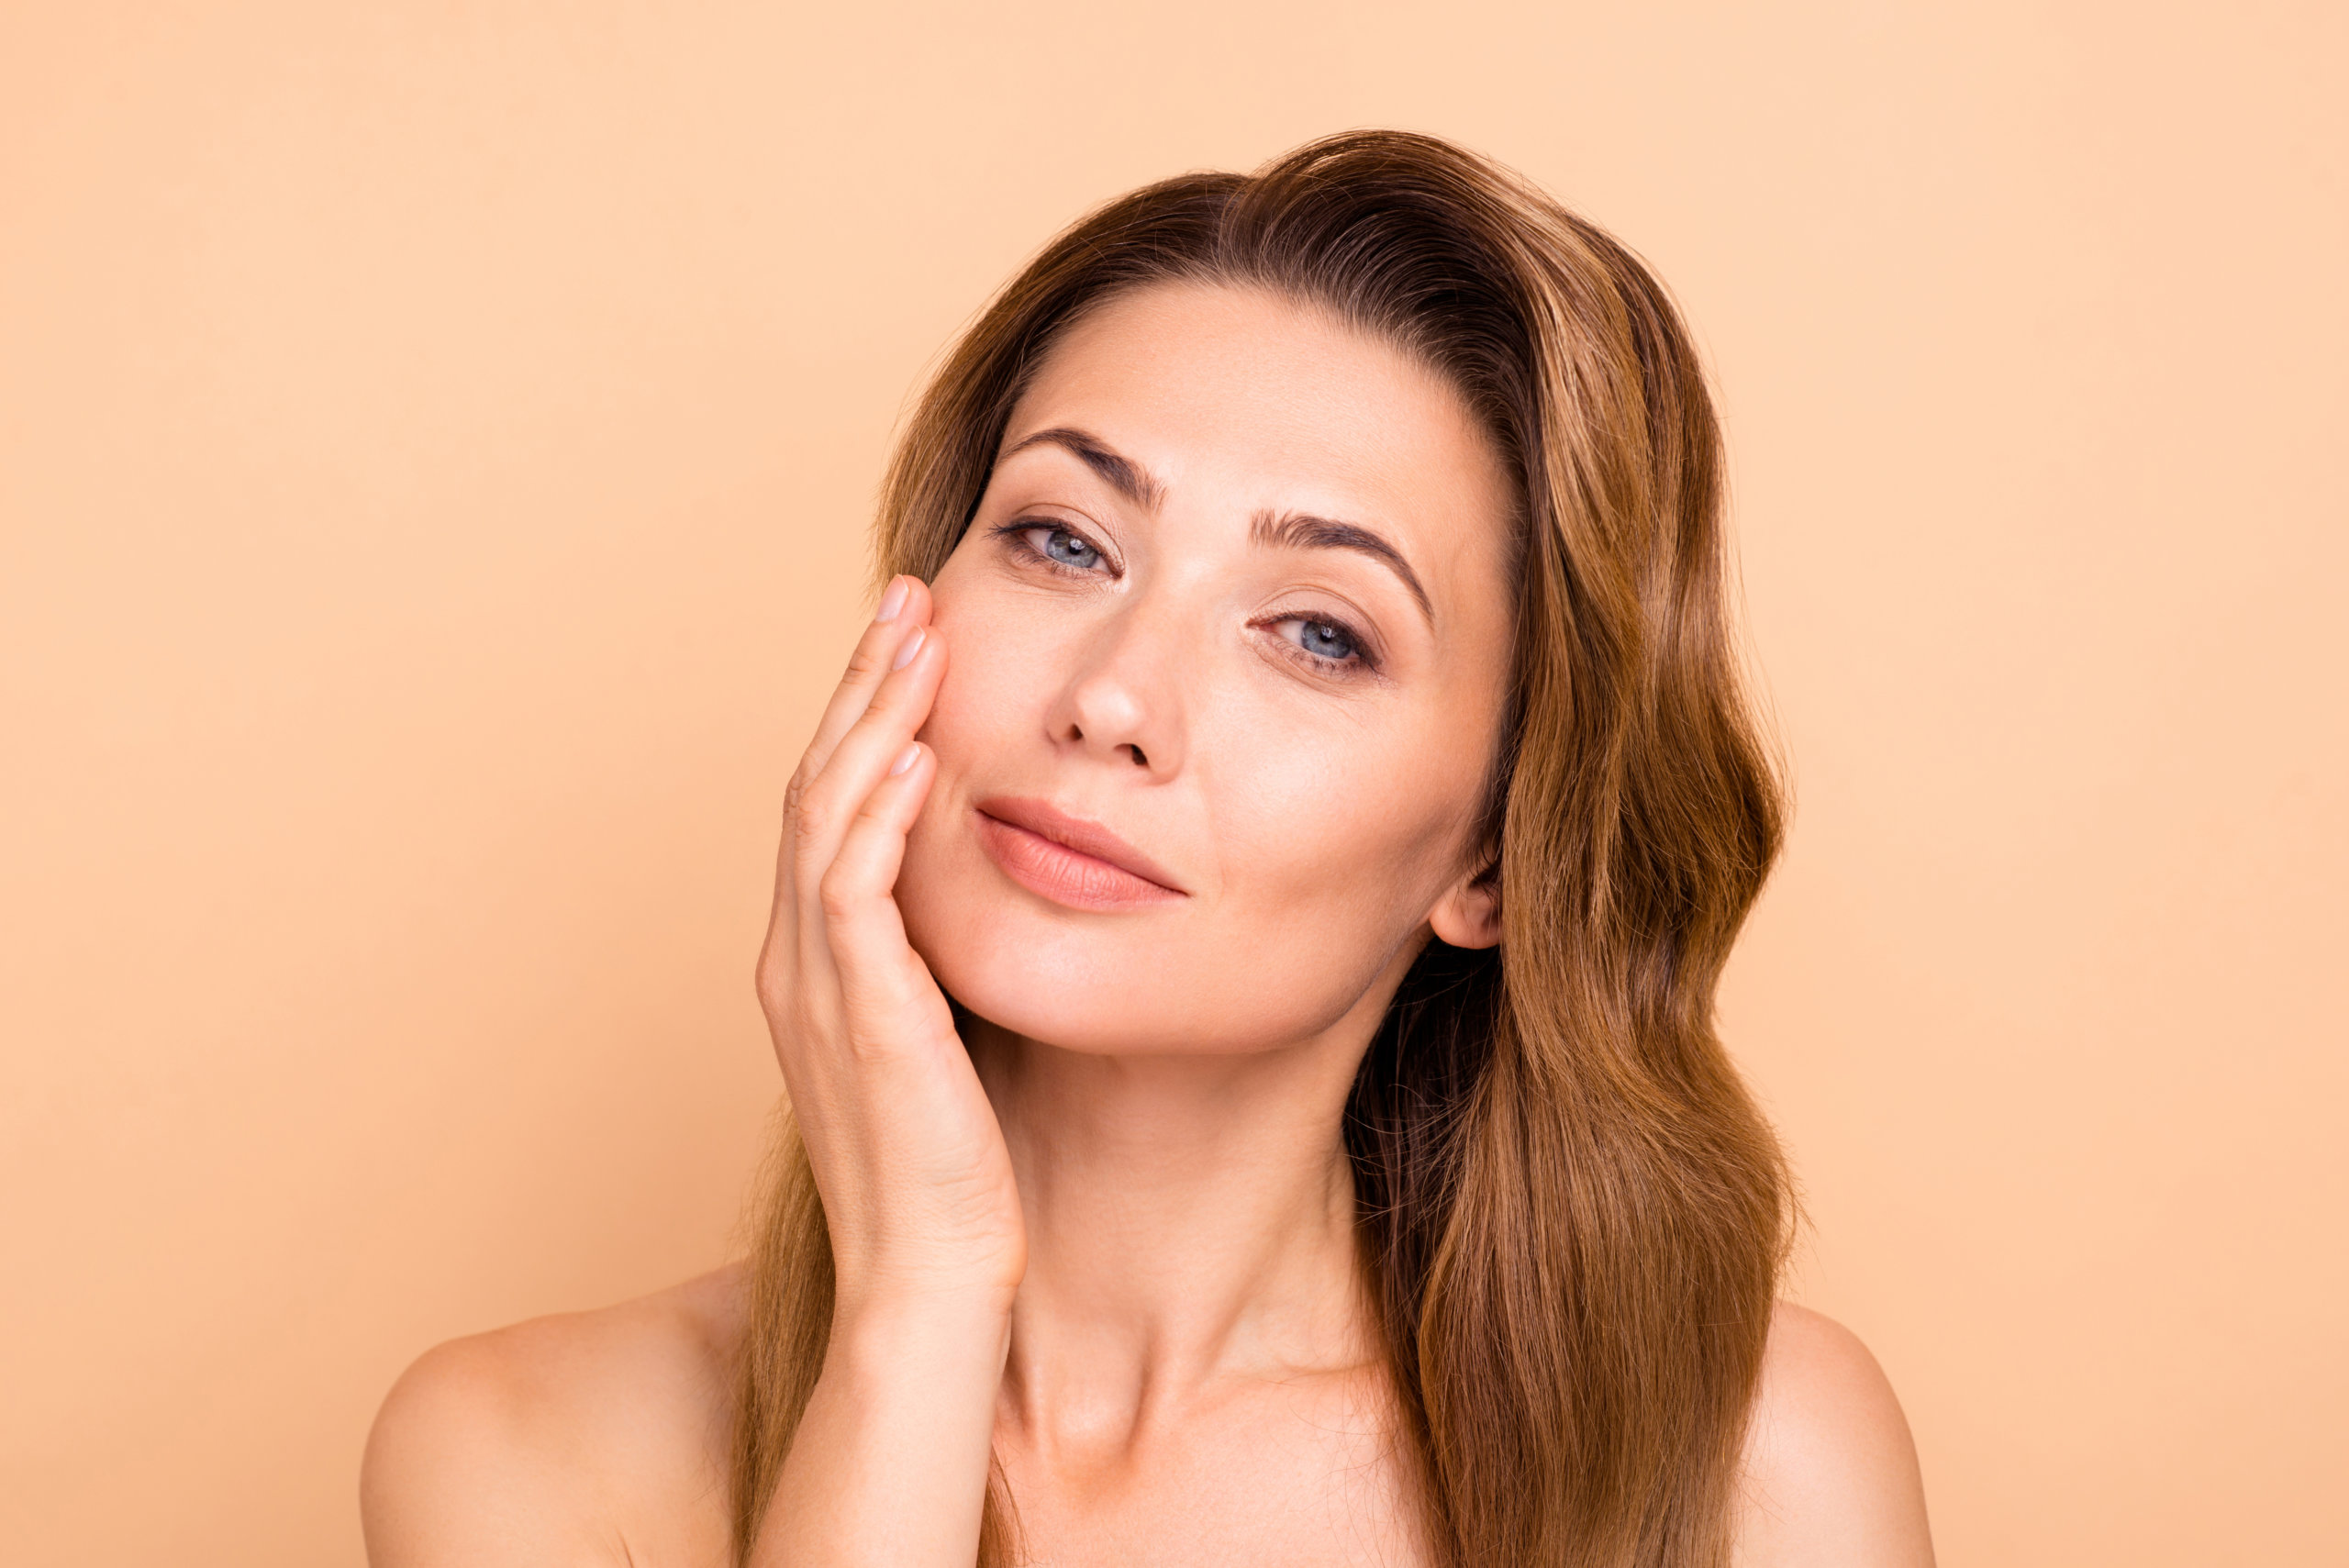 A Nonsurgical Facelift: Is It Really Possible?